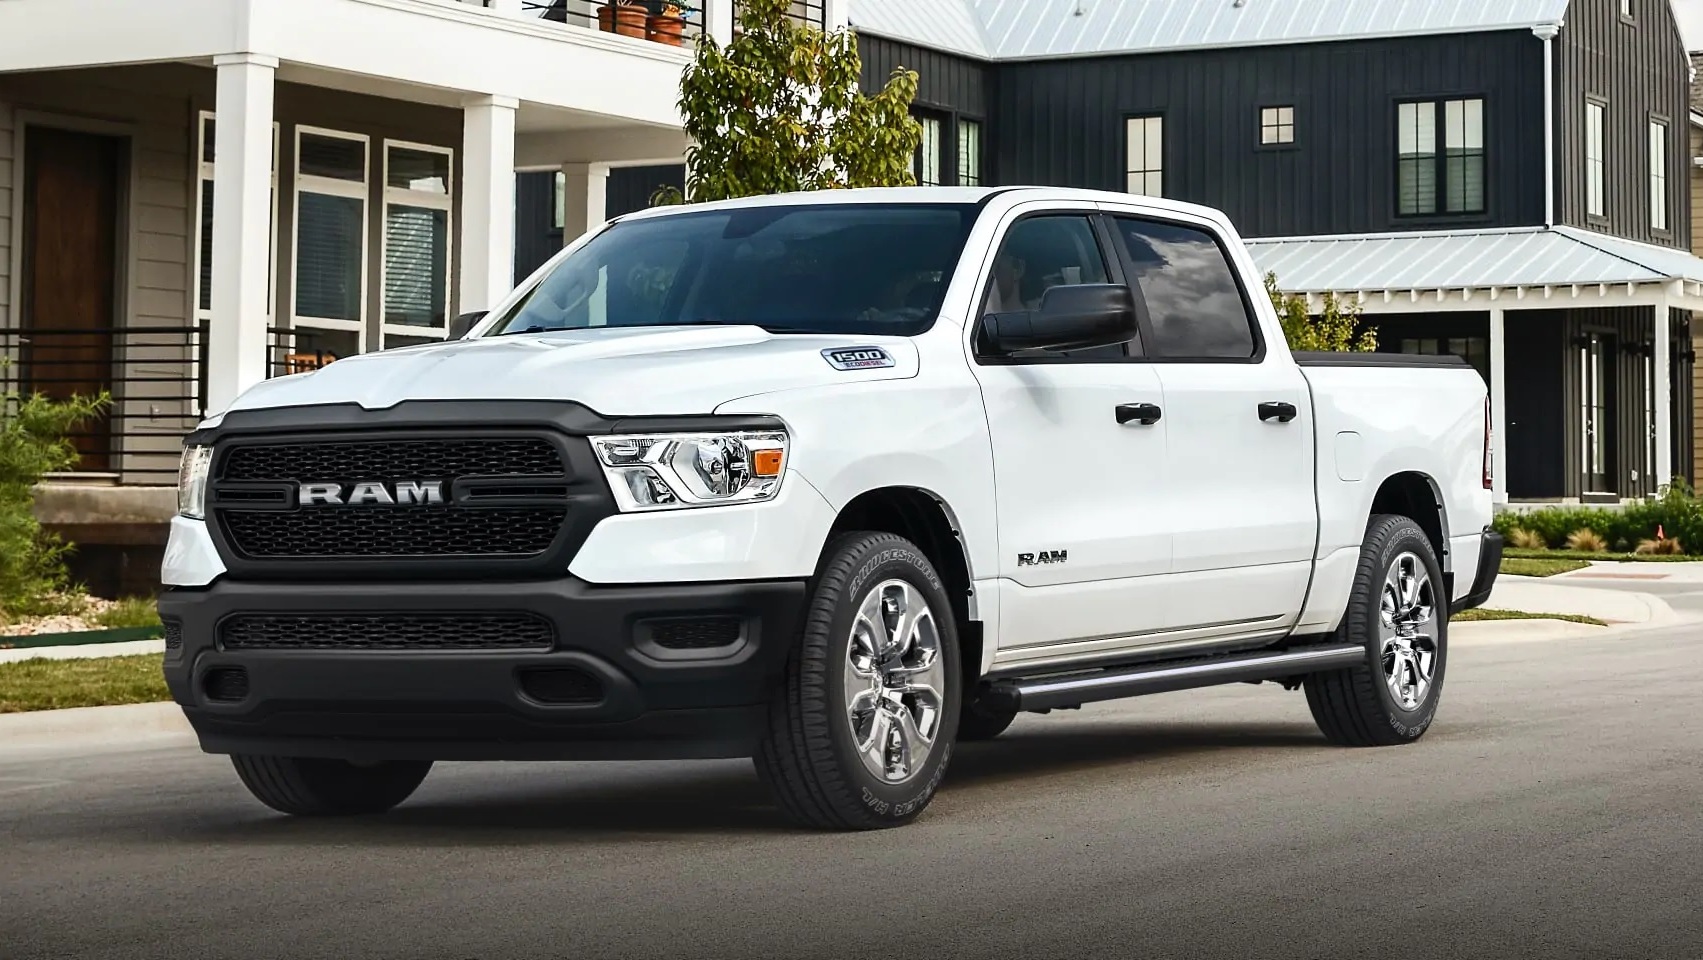 Ram Introduces Tradesman HFE EcoDiesel With 33 MPG Highway Rating